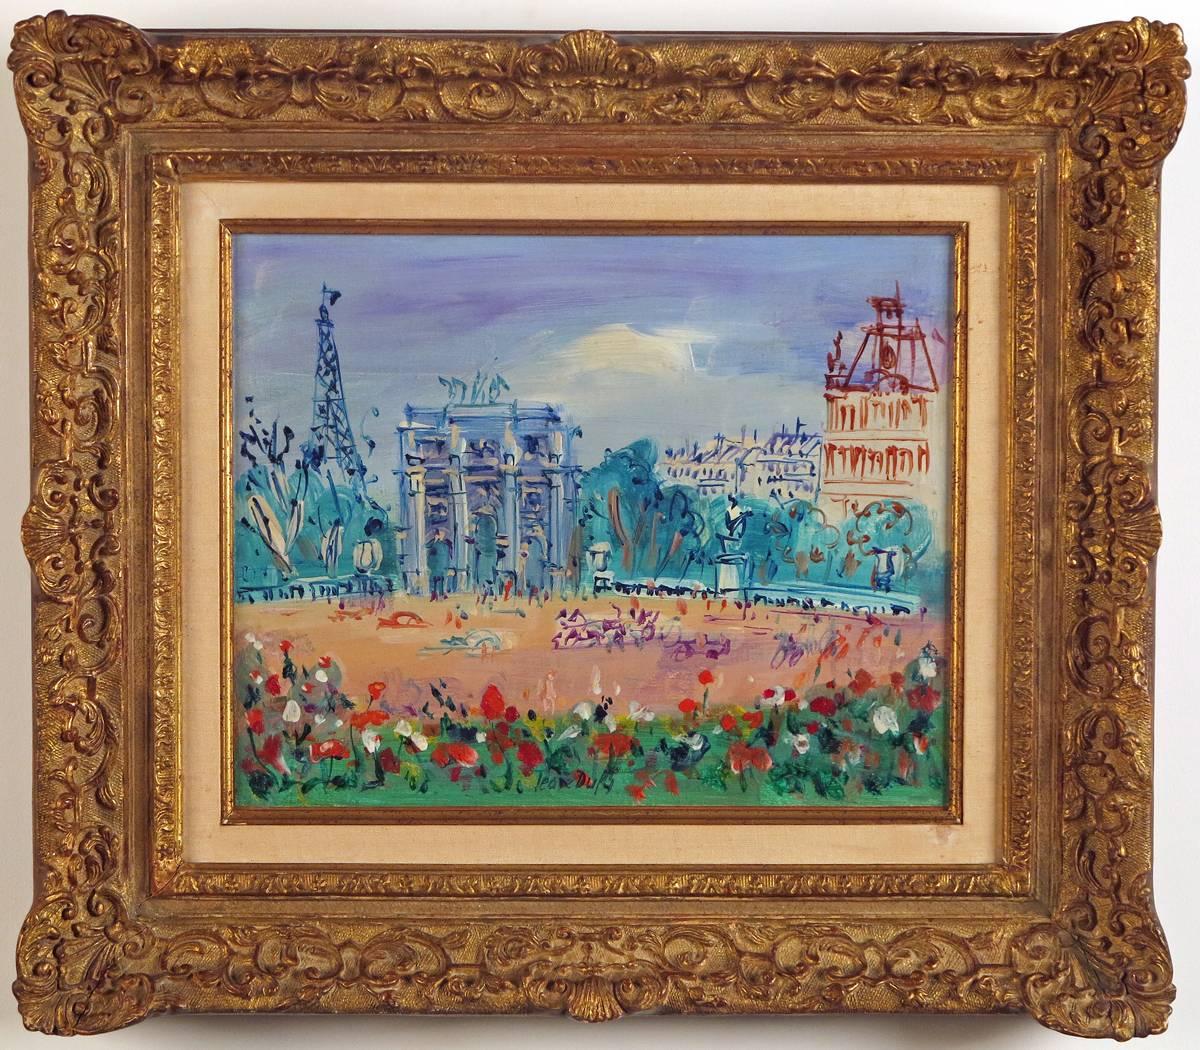 Jean Dufy
French, 1888-1964
Le Jardin des Tuileries et l‘Arc de Triomphe du Carrousel

Oil on canvas
Measure: 13 ¼ by 16 ½ in. W/frame 22 ¼ by 25 ½ in.
Signed bottom center

From LeHavre and an arts-oriented family of eleven children